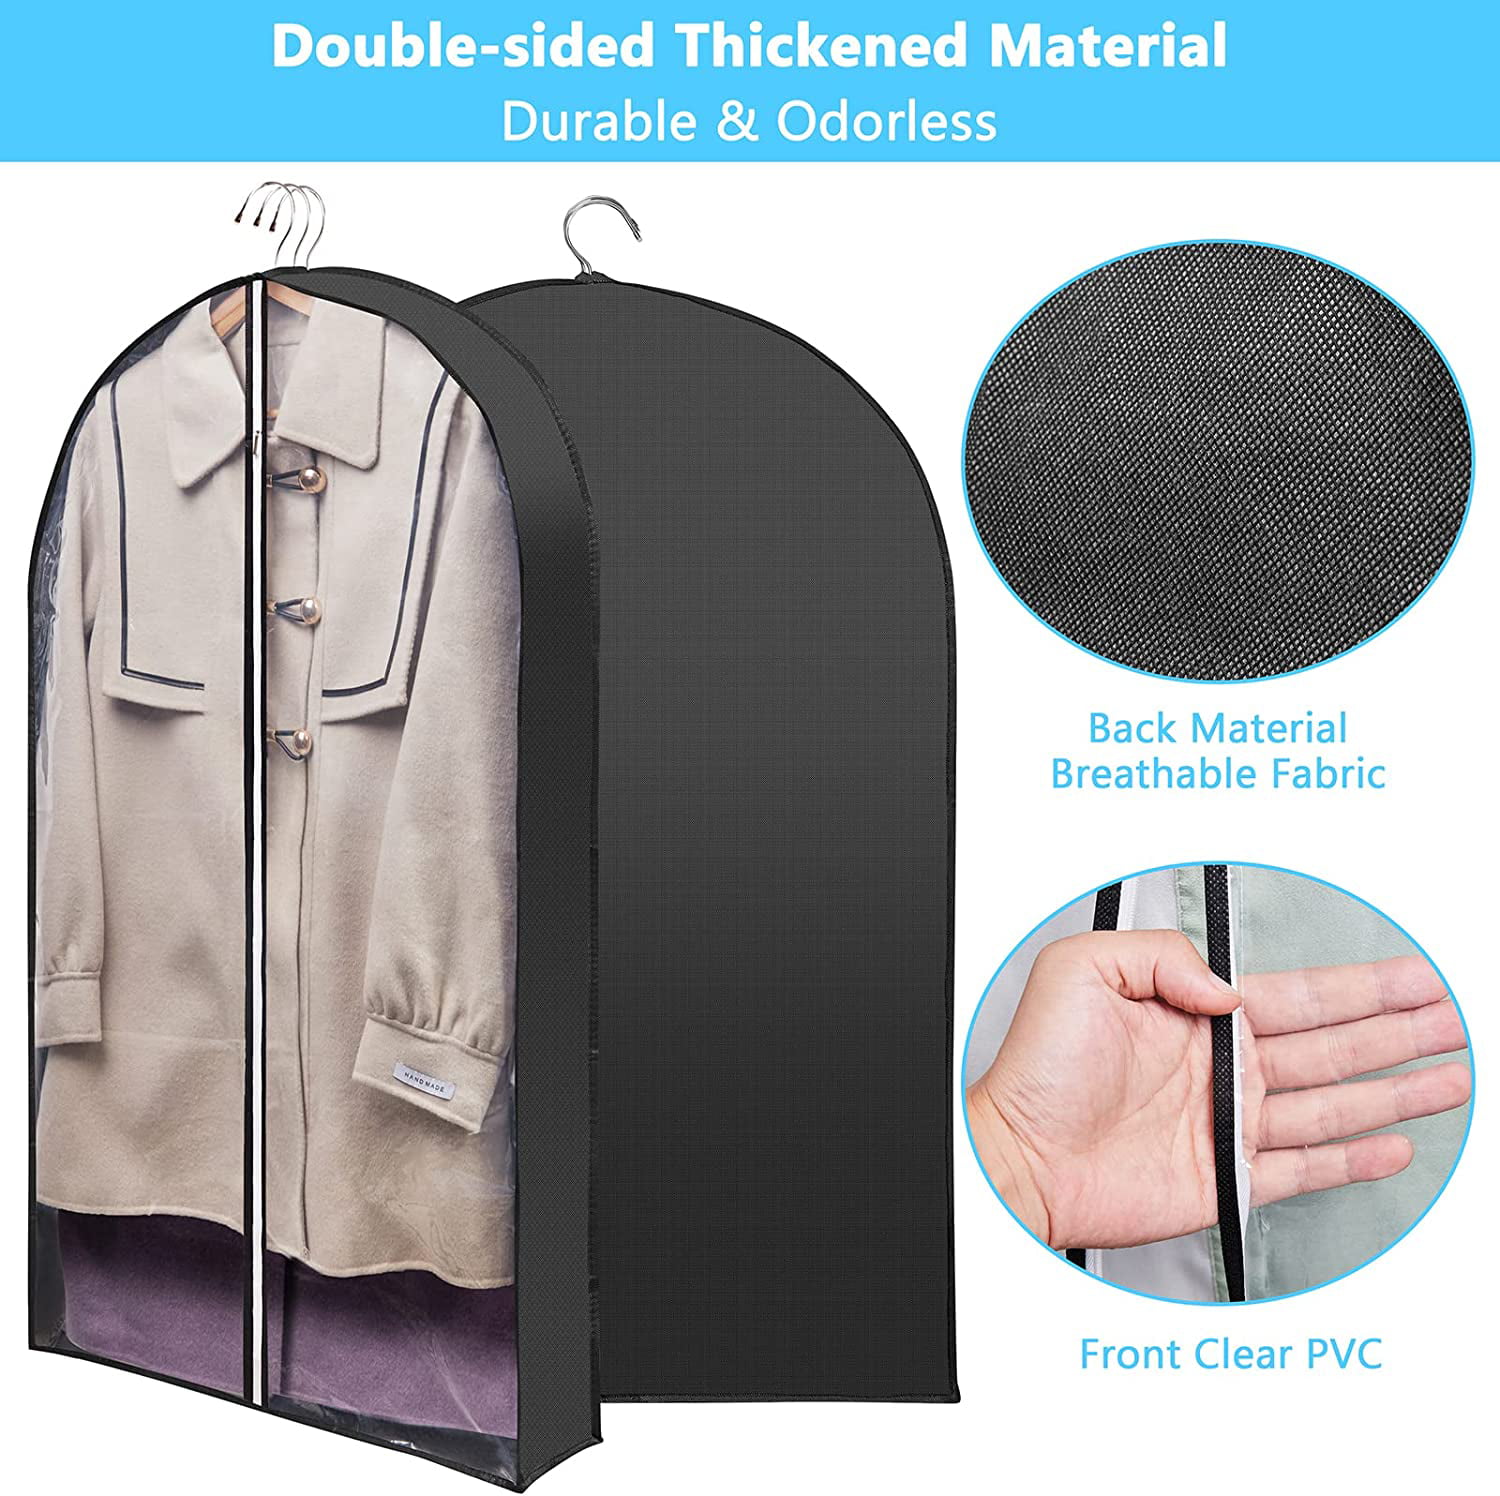 Garment Bags Suit Bag Storage Hanging Clothes Suitable for Storage of  Dresses Suits Overcoats Garment Can Provide Neatness and SpaceSaving for  Your Wardrobe  China Garment Bags and Suit Bag price 